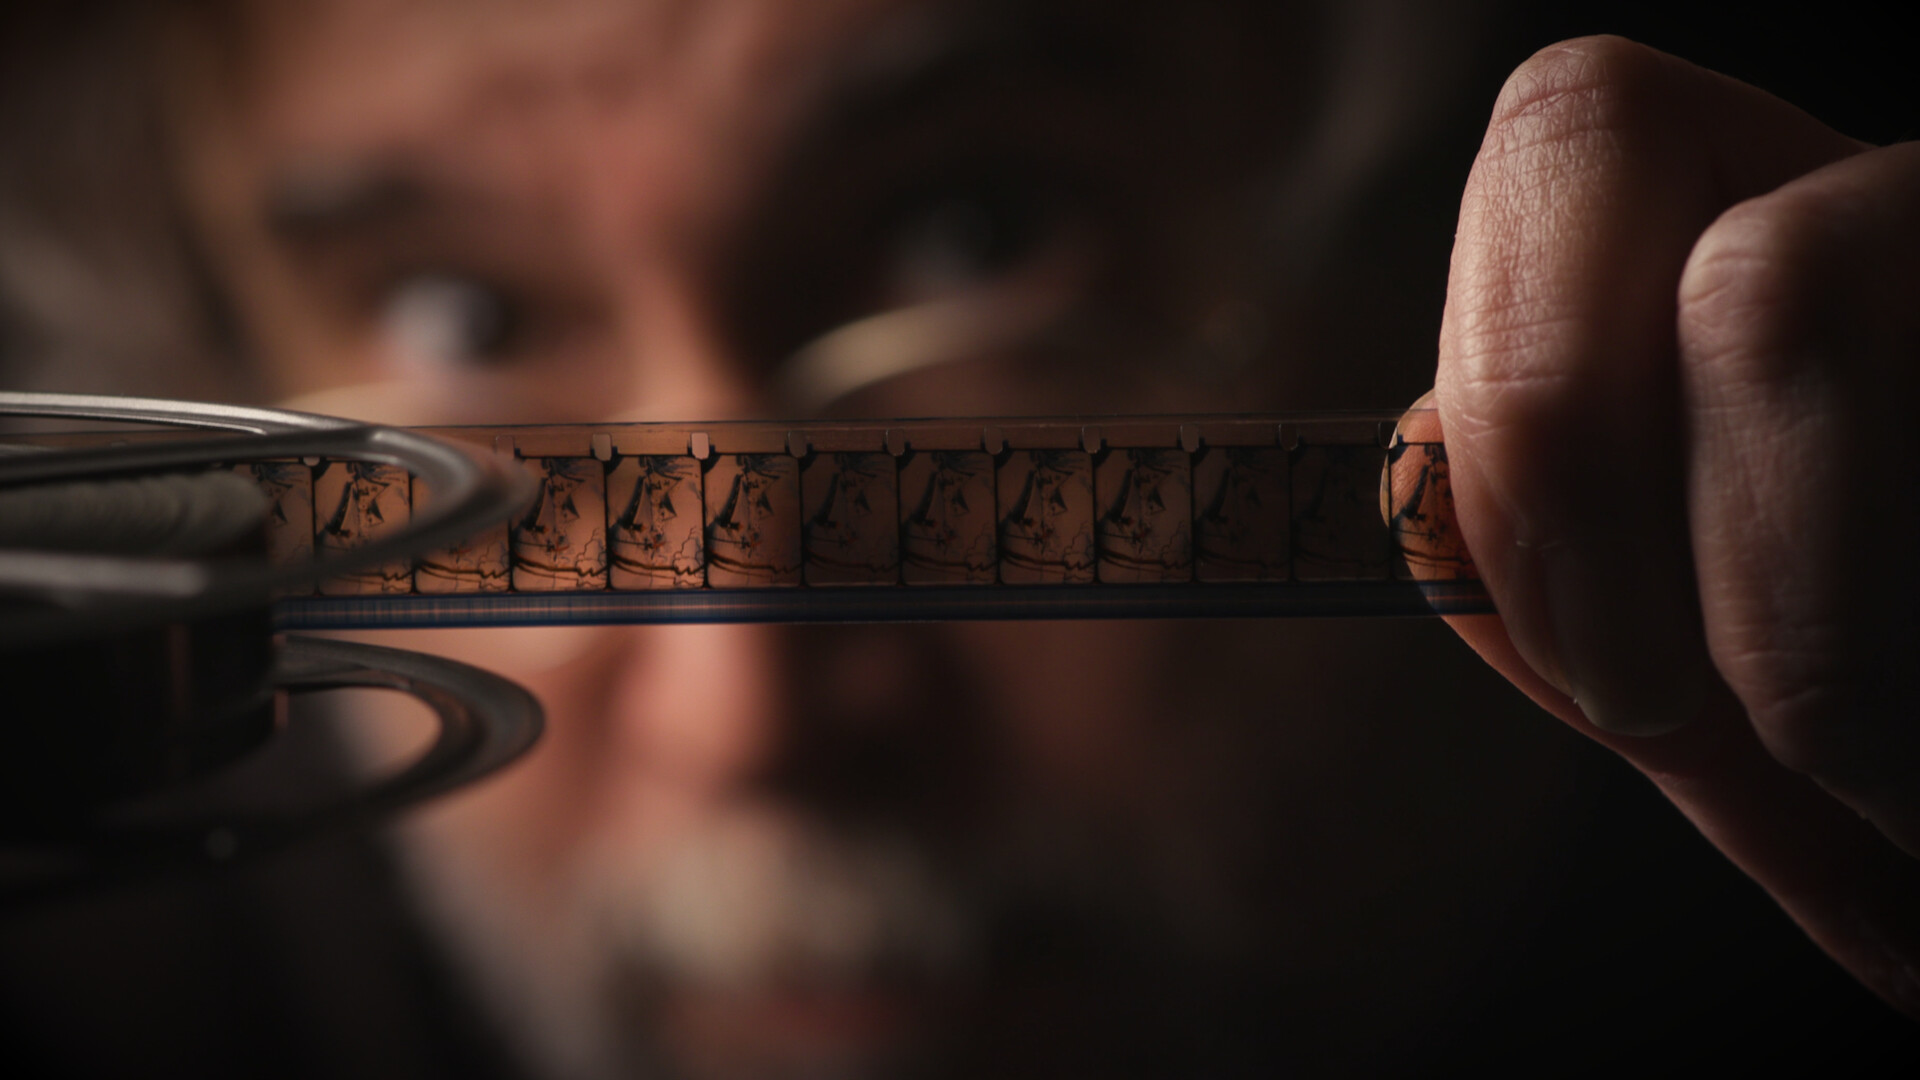 man holds strip of 16mm film in camera focus, his face out of focus